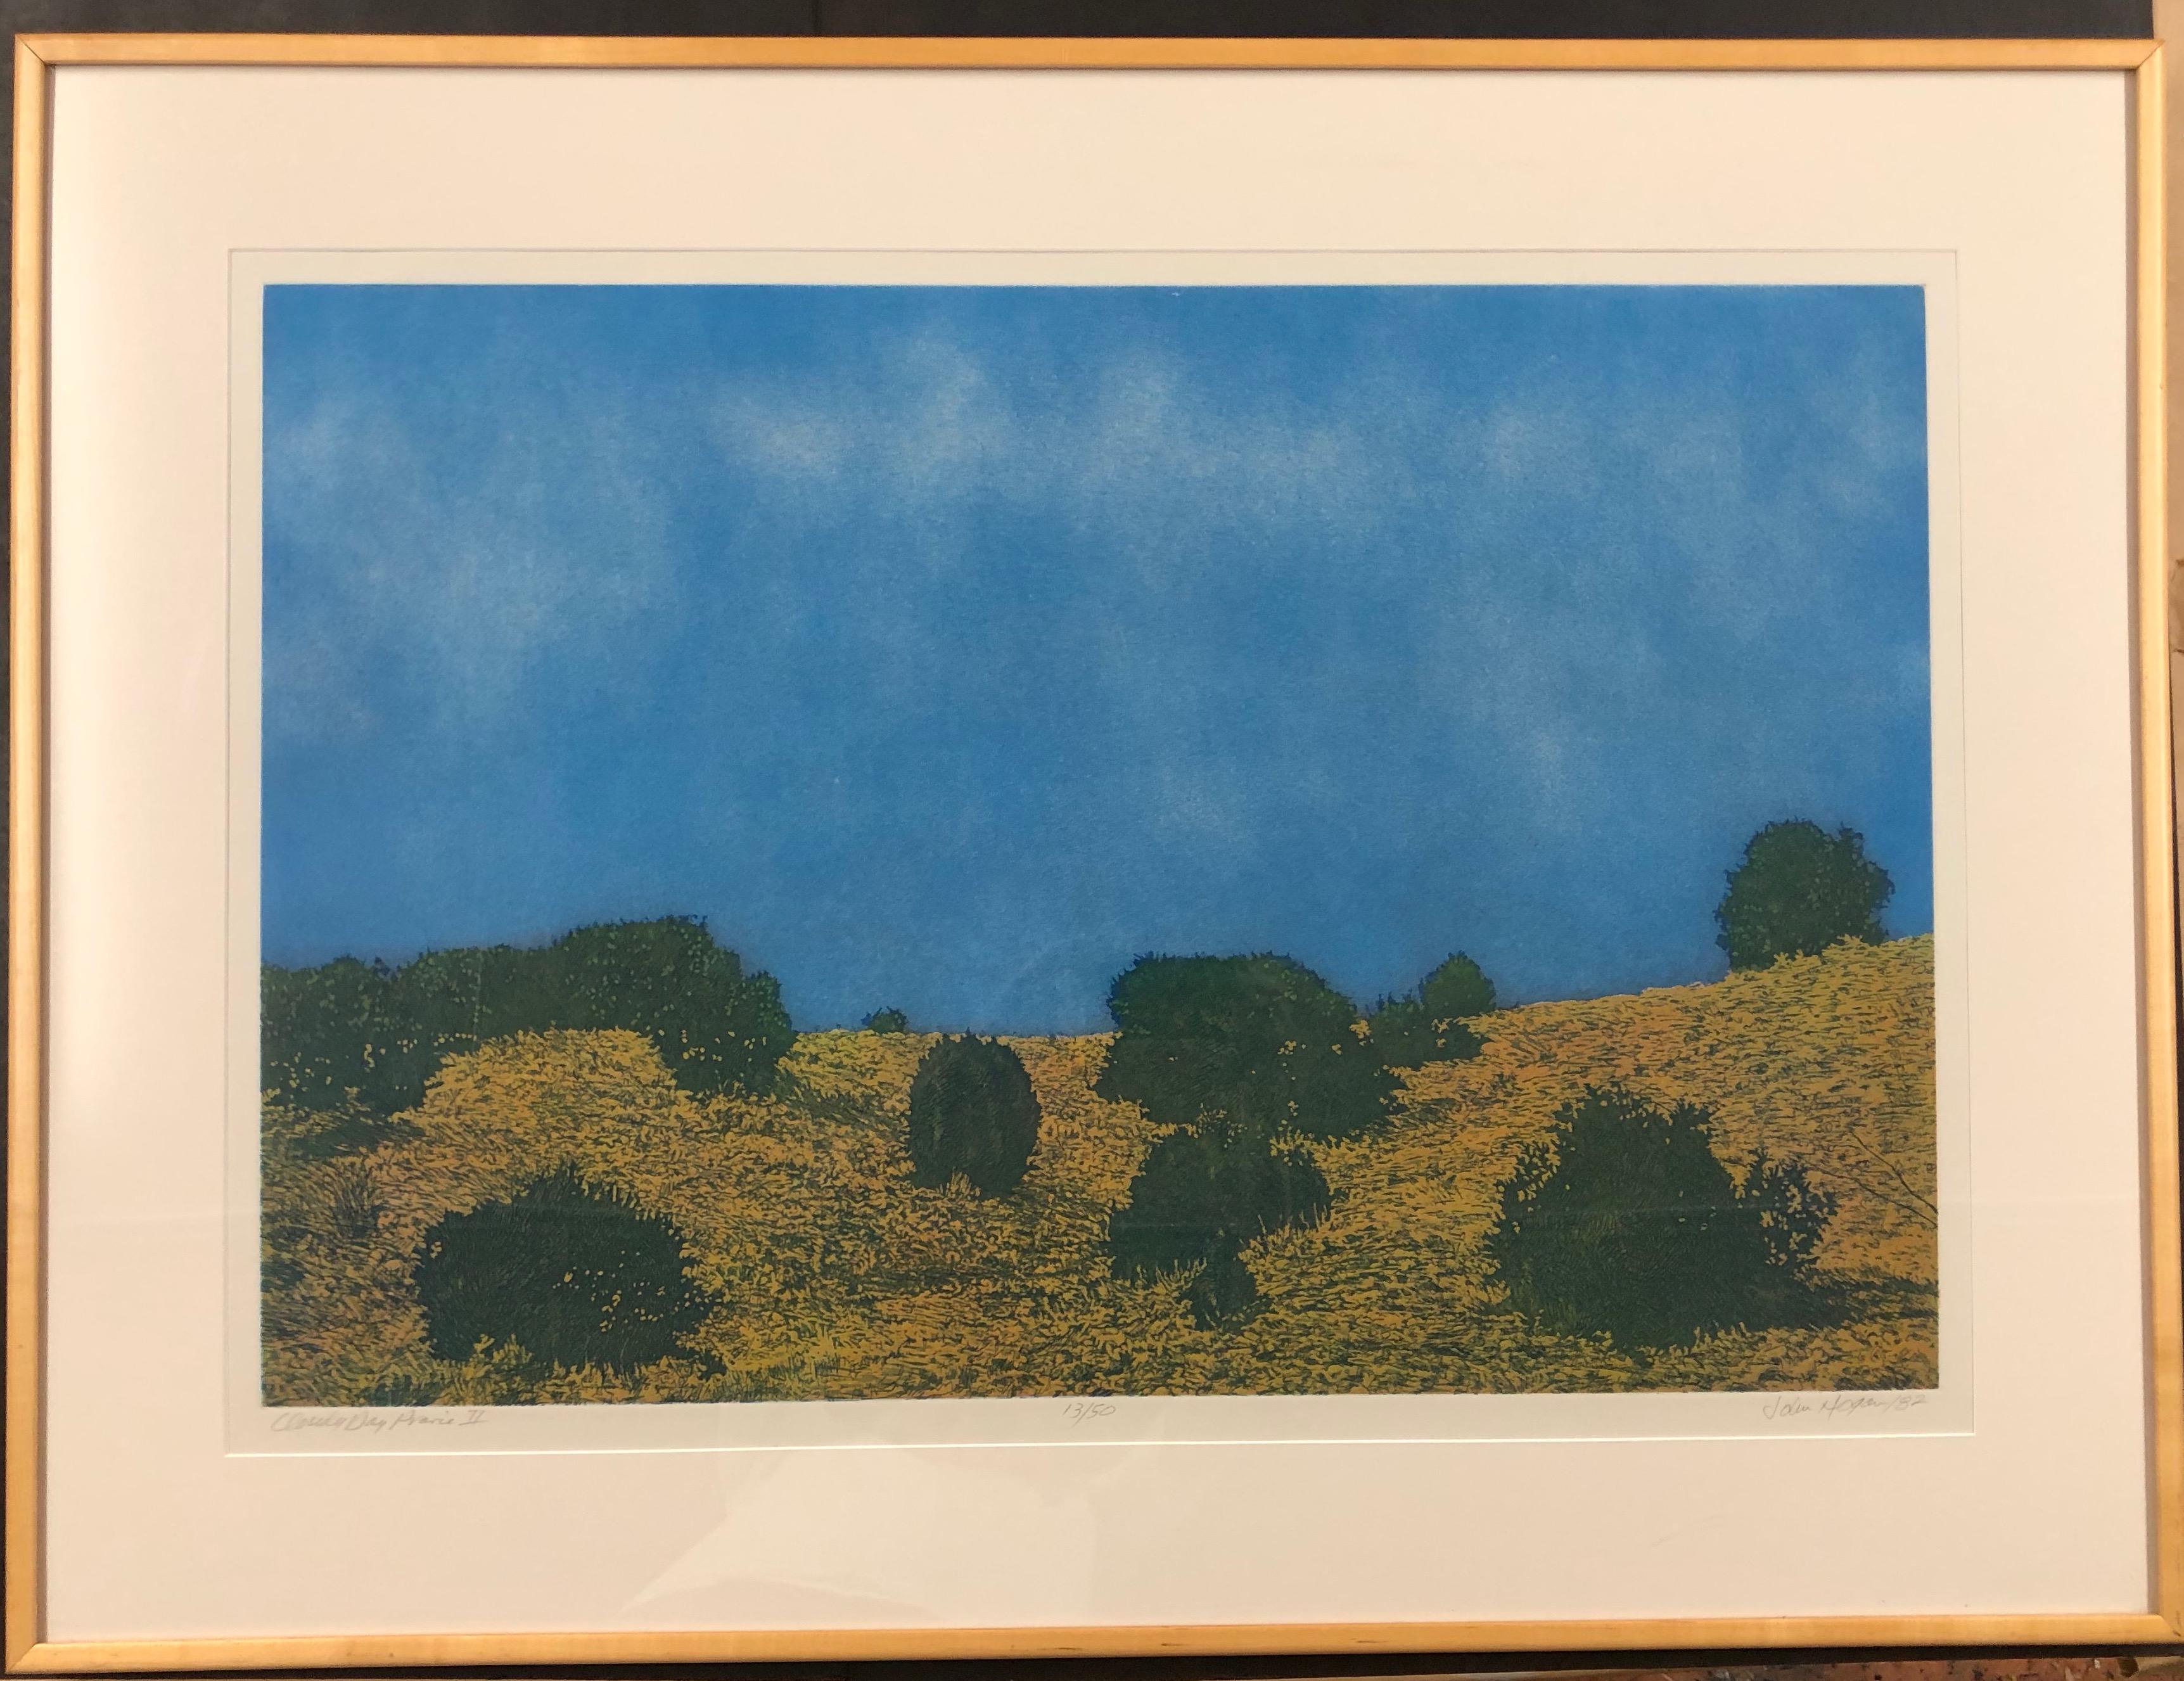 Cloudy Day Prairie II, by John Hogan, New Mexico Landscape Color Etching, blues